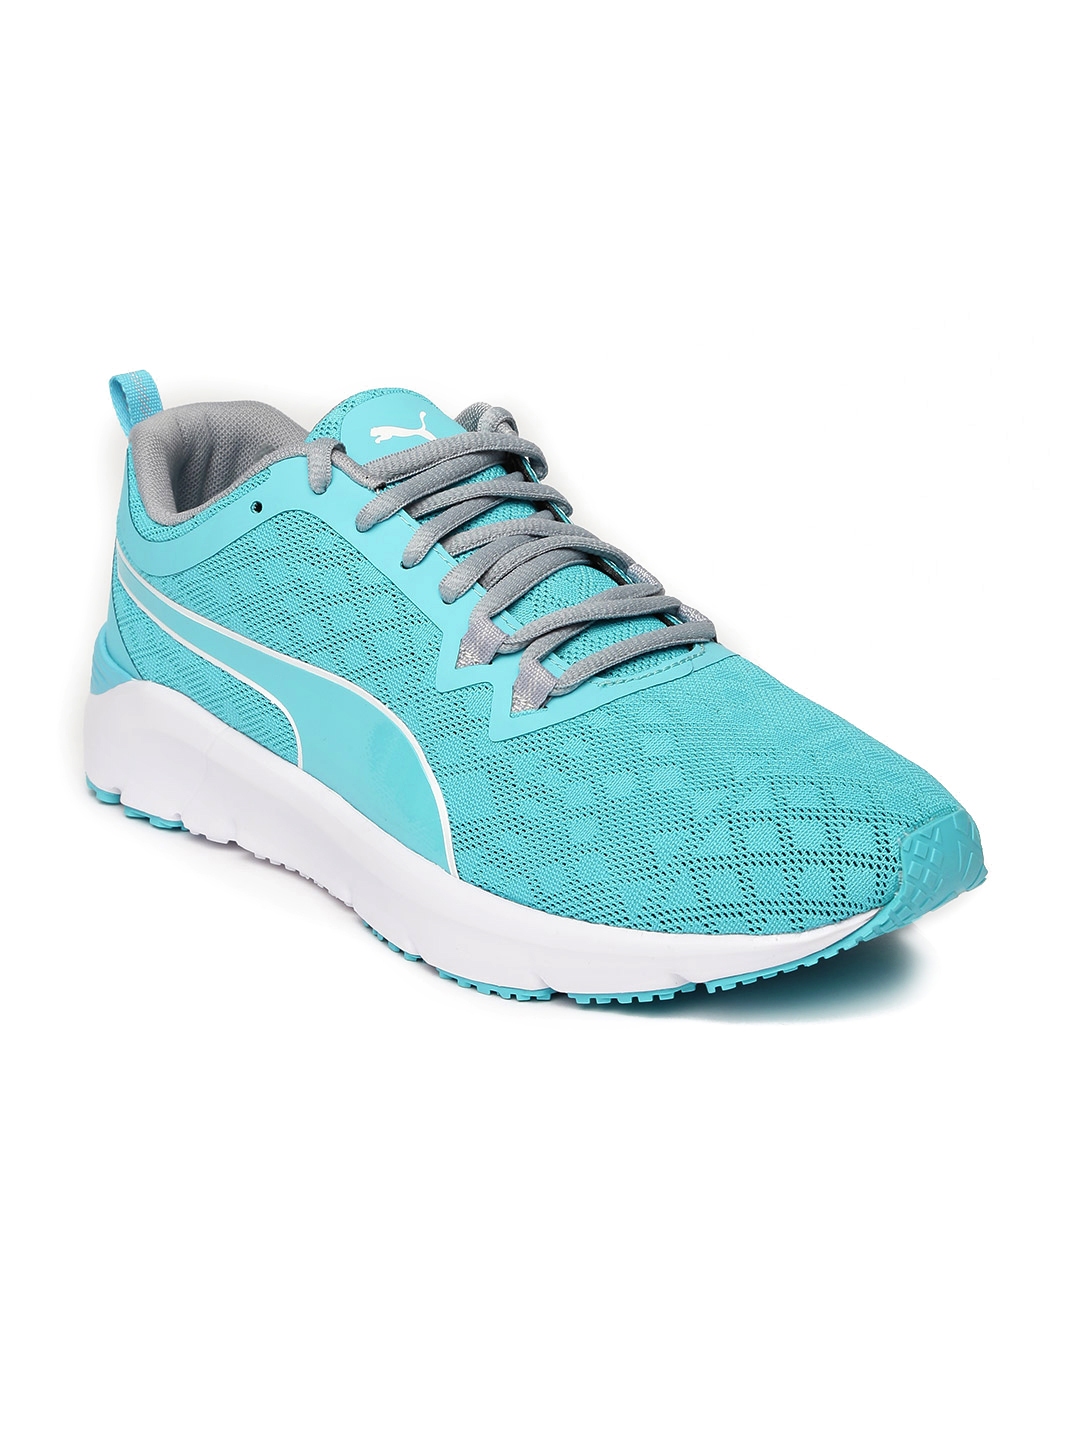 Buy Puma Women Turquoise Blue Rush Training Shoes - Sports Shoes for ...